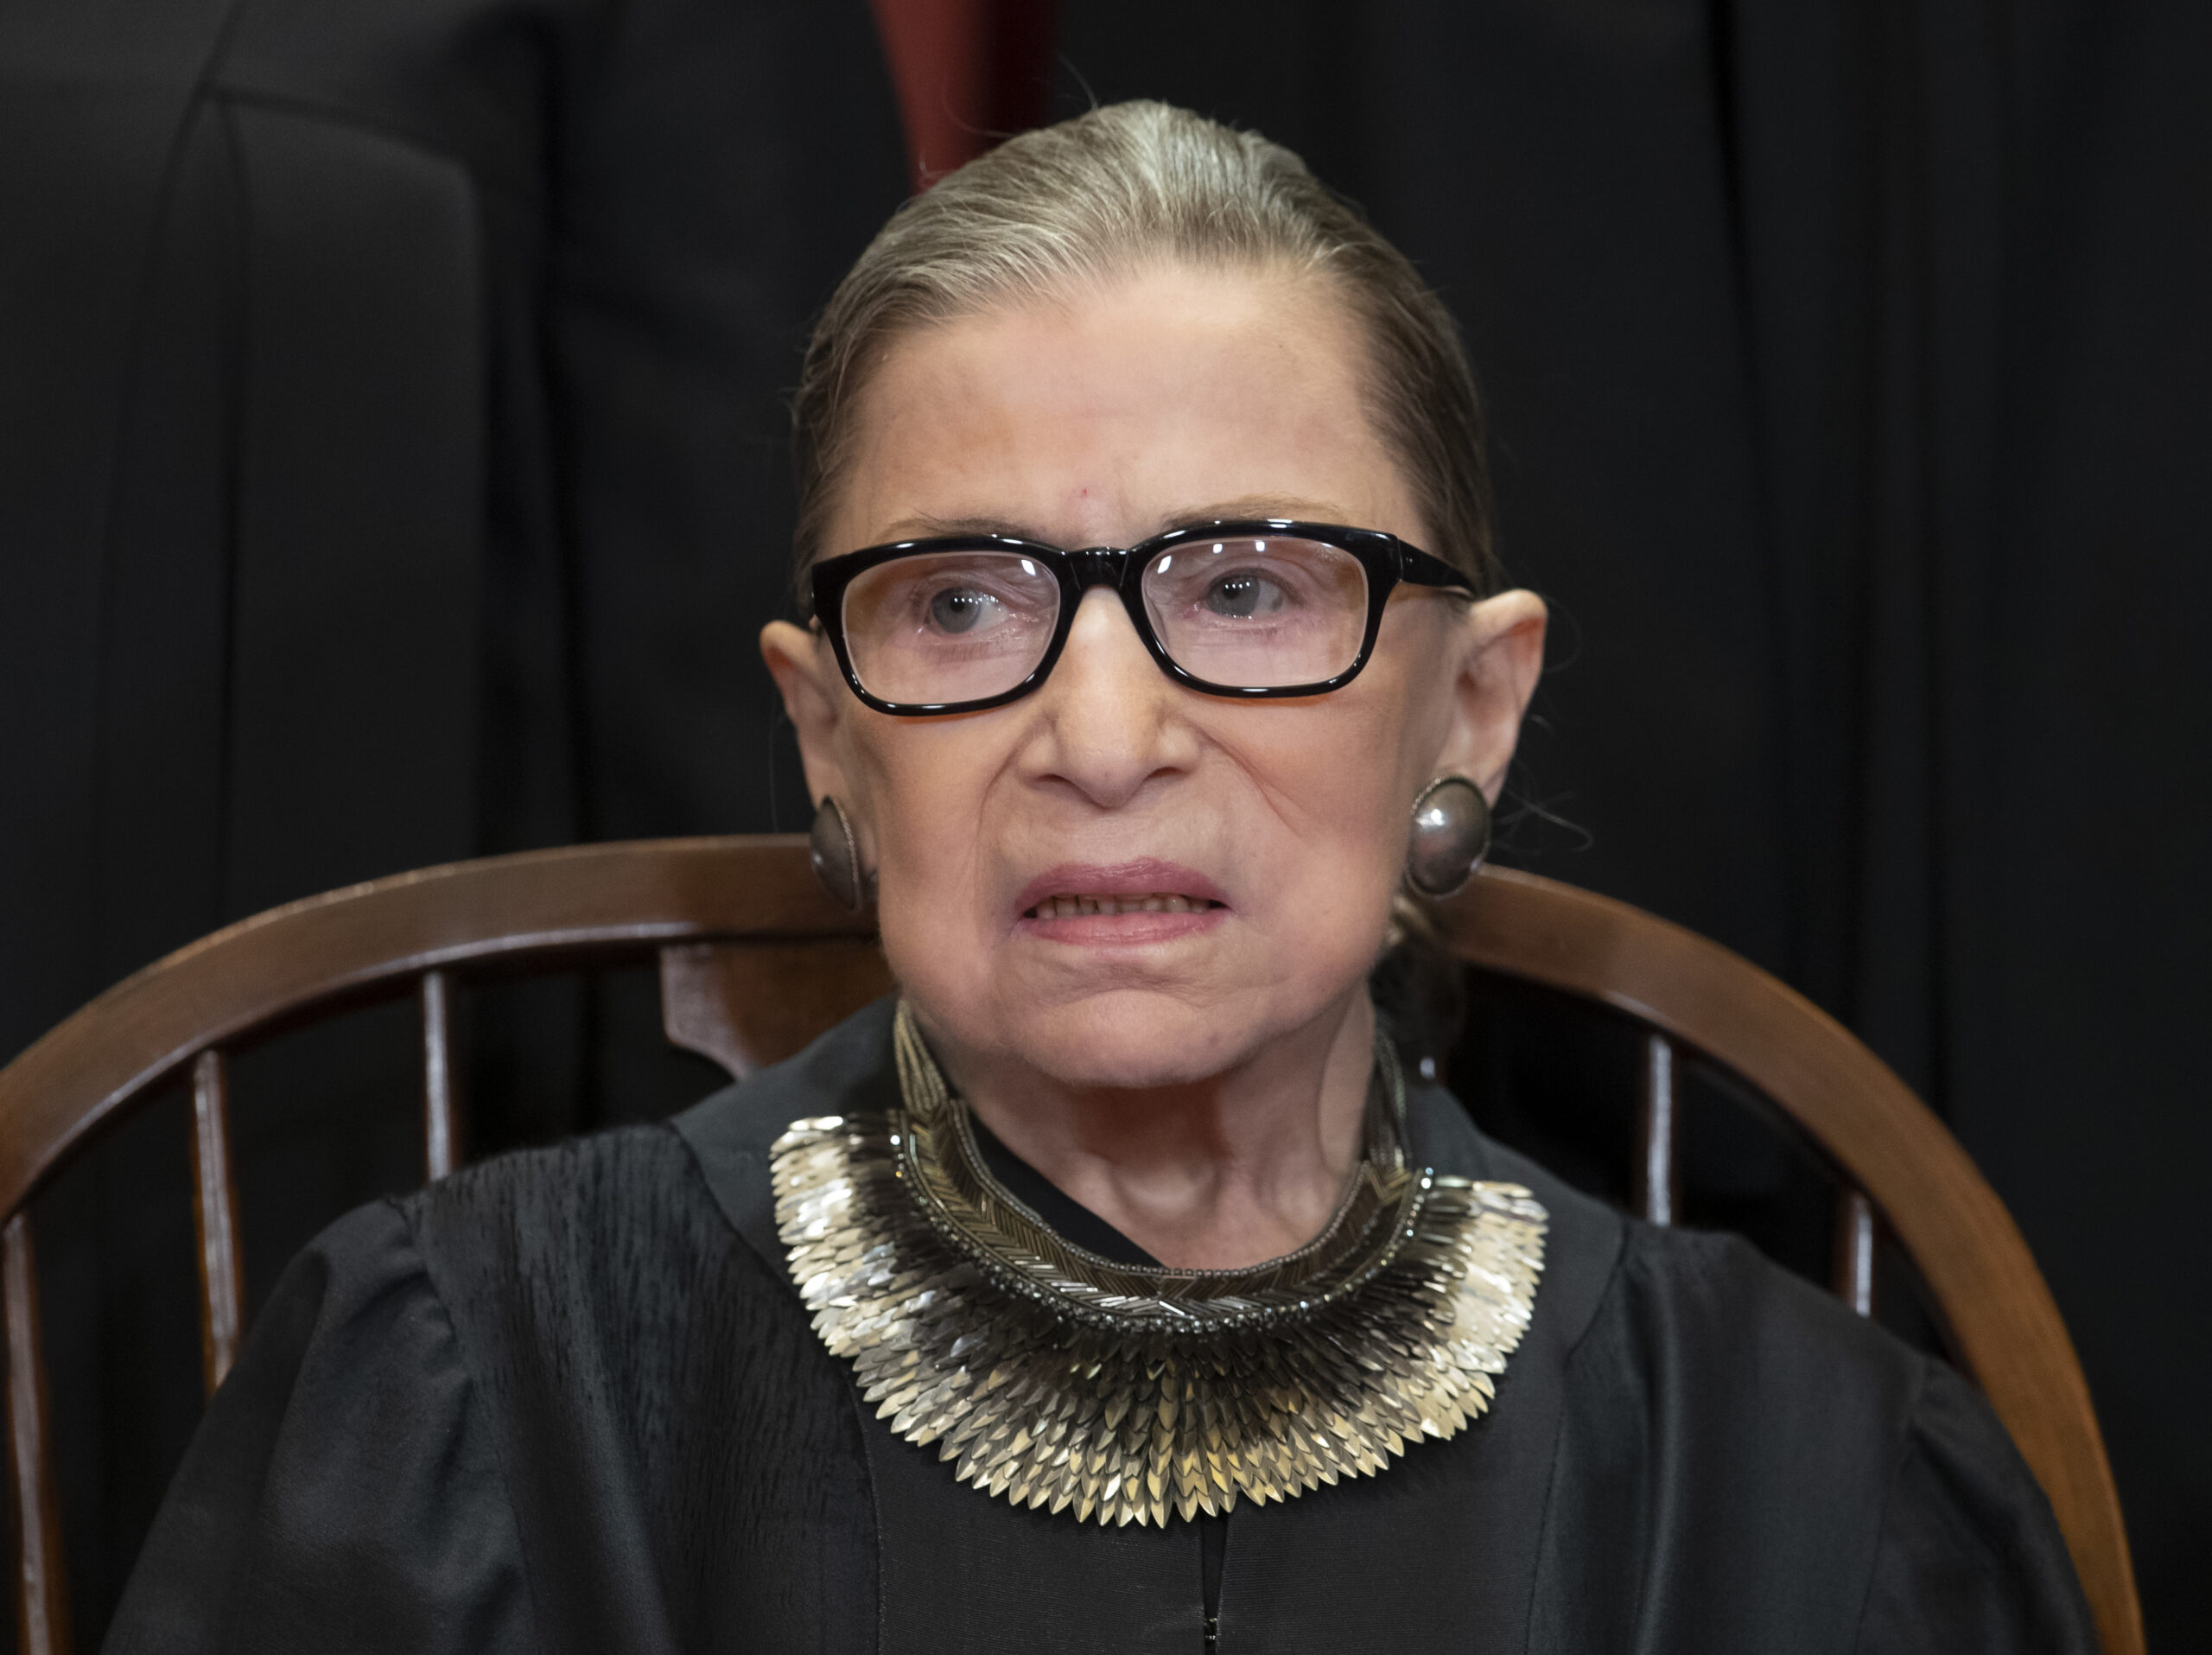 Ruth Bader Ginsburg Awards Canceled After Family Objects to Winners That Included Elon Musk, Rupert Murdoch (mediaite.com)